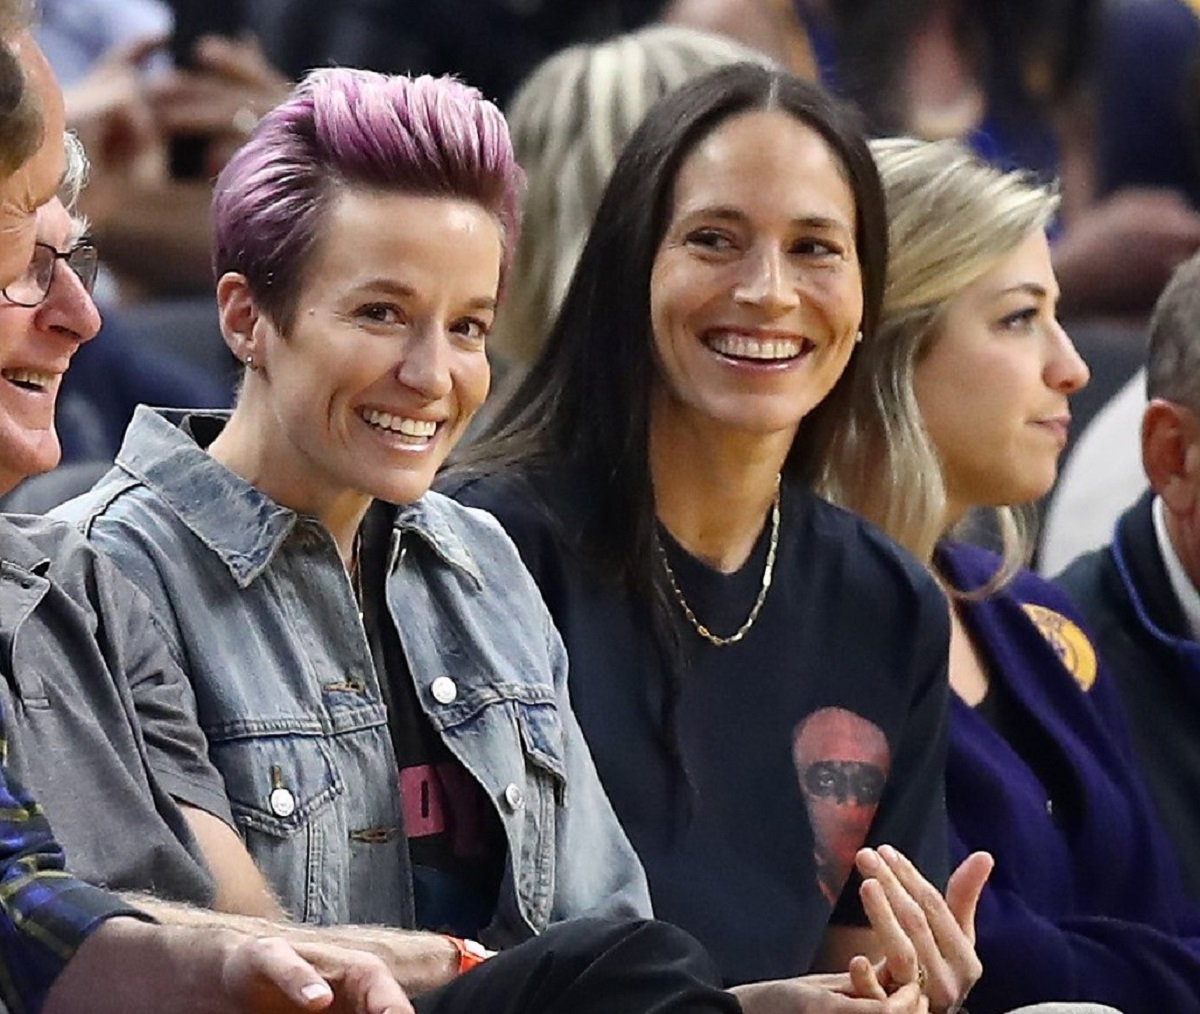 Megan Rapinoe, who is younger than and Sue Bird, watch the Golden State Warriors game together